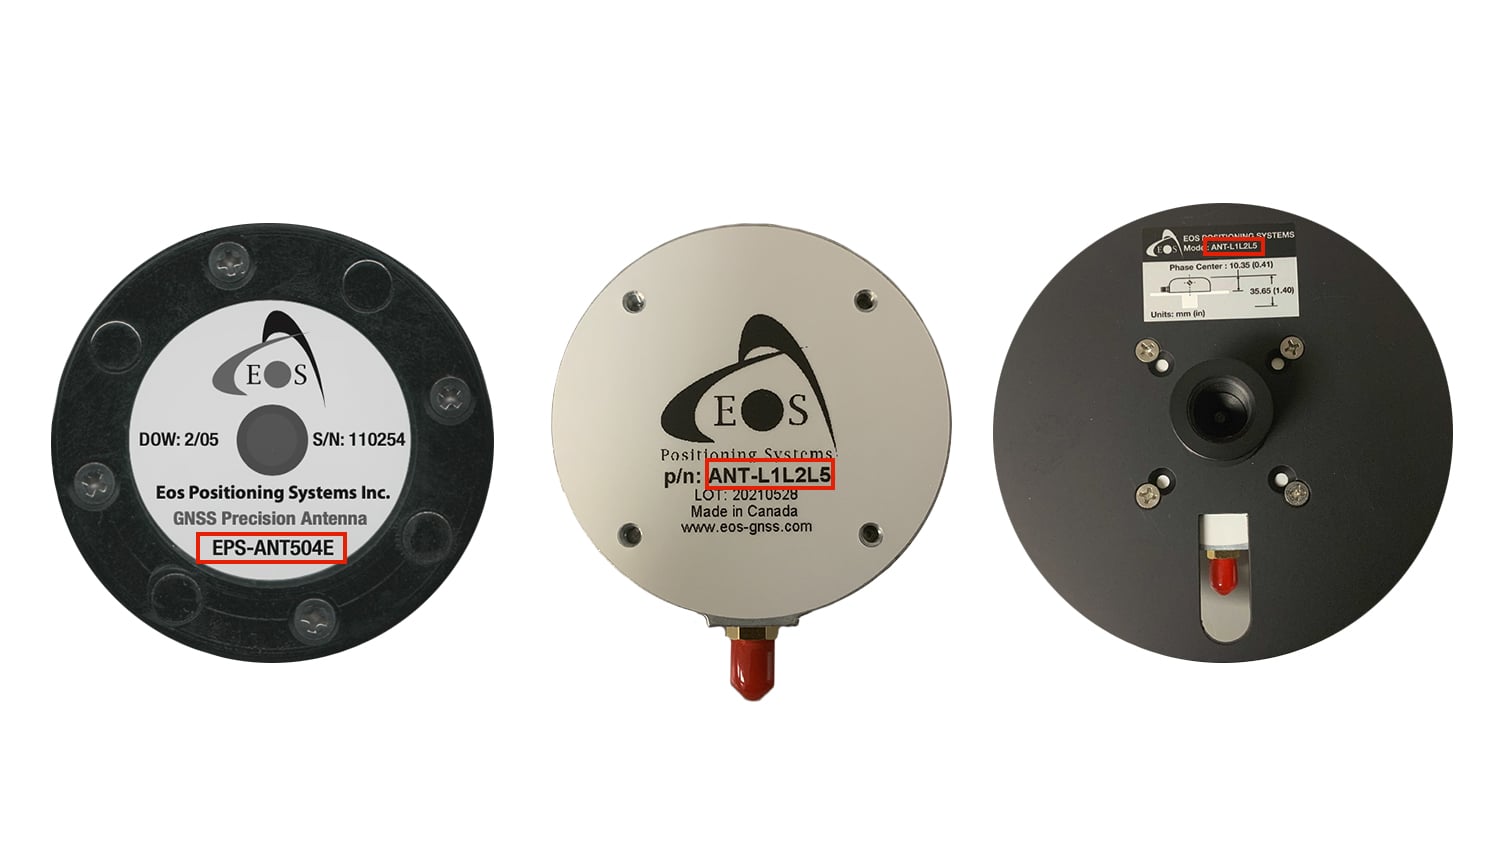 Find Your Antenna Model Number on the Back of the Eos Arrow GNSS Antennaes